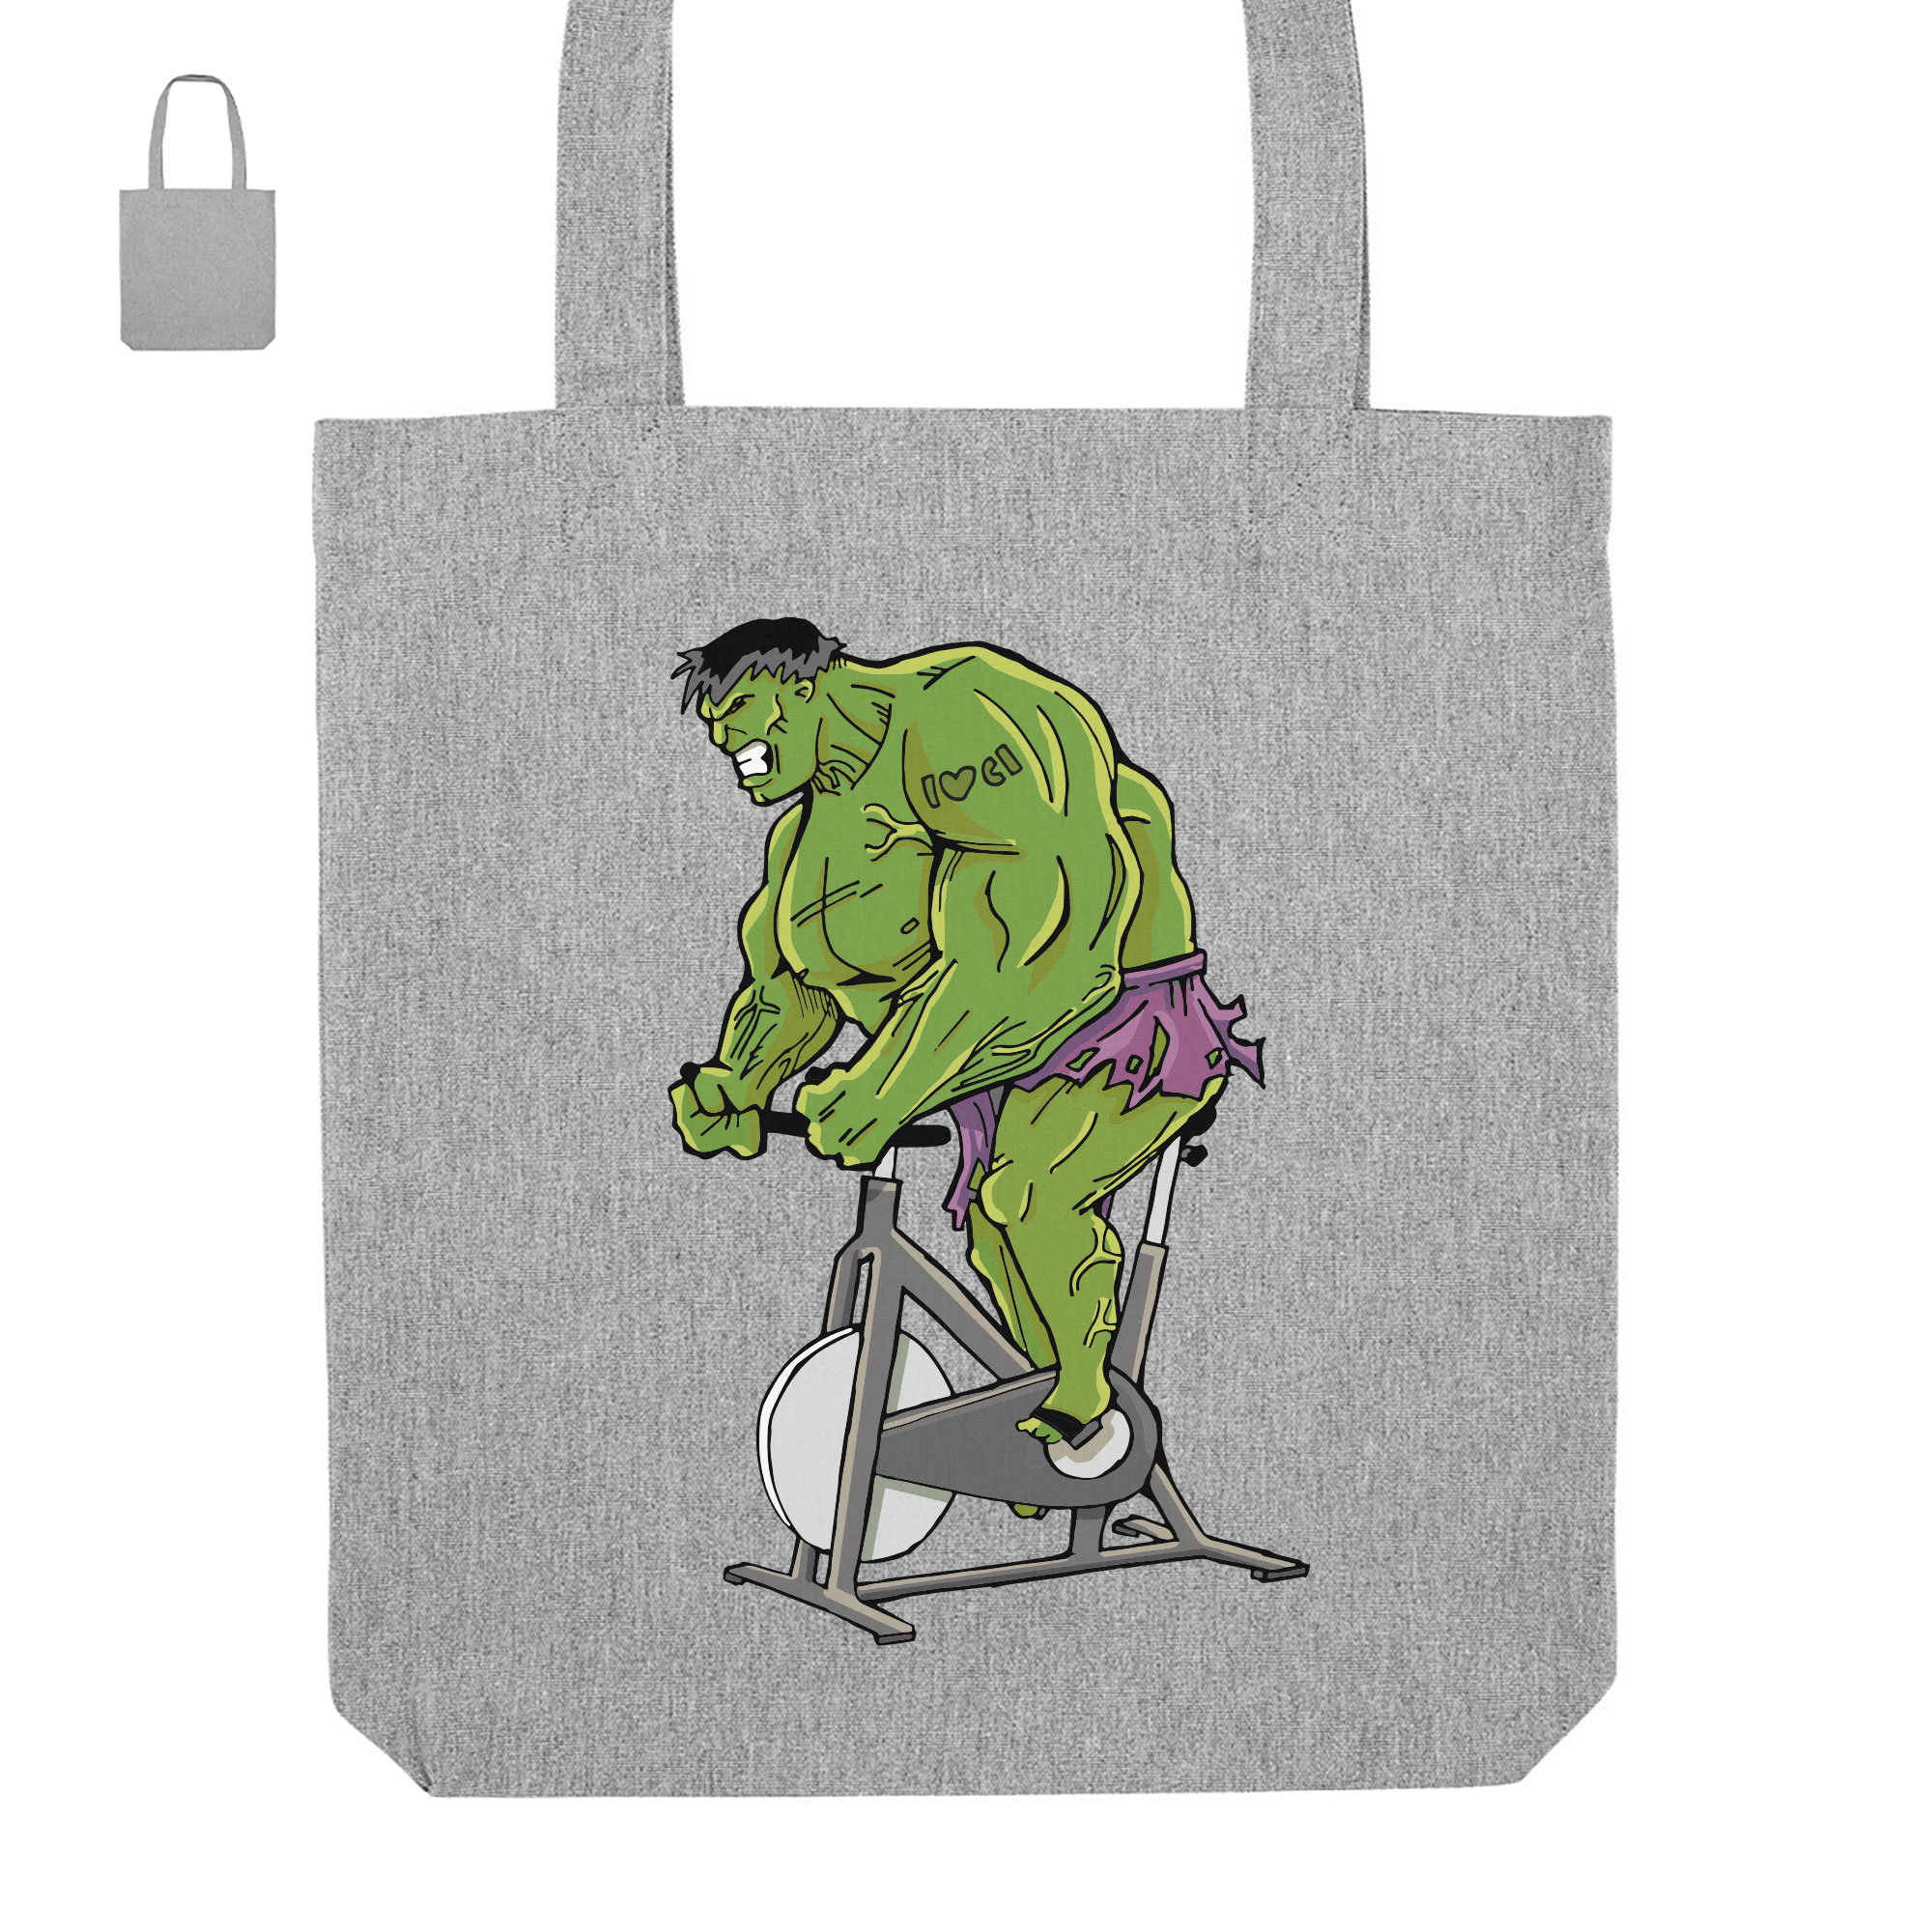 Tote bag GREEN MUSCLES